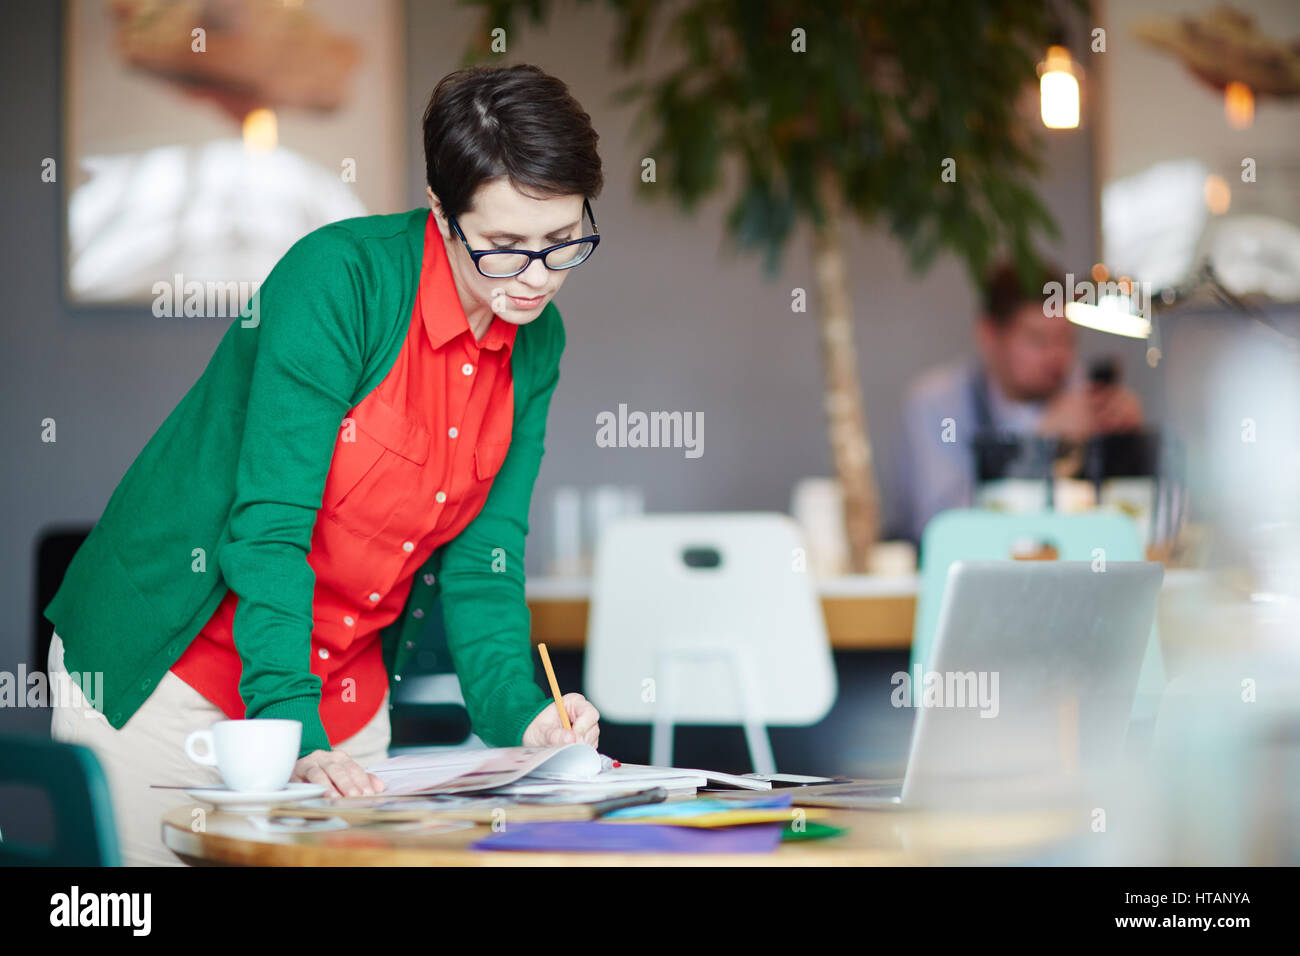 Portrait of young successful businesswoman wearing colorful casual clothes standing at table working with notes and magazines Stock Photo